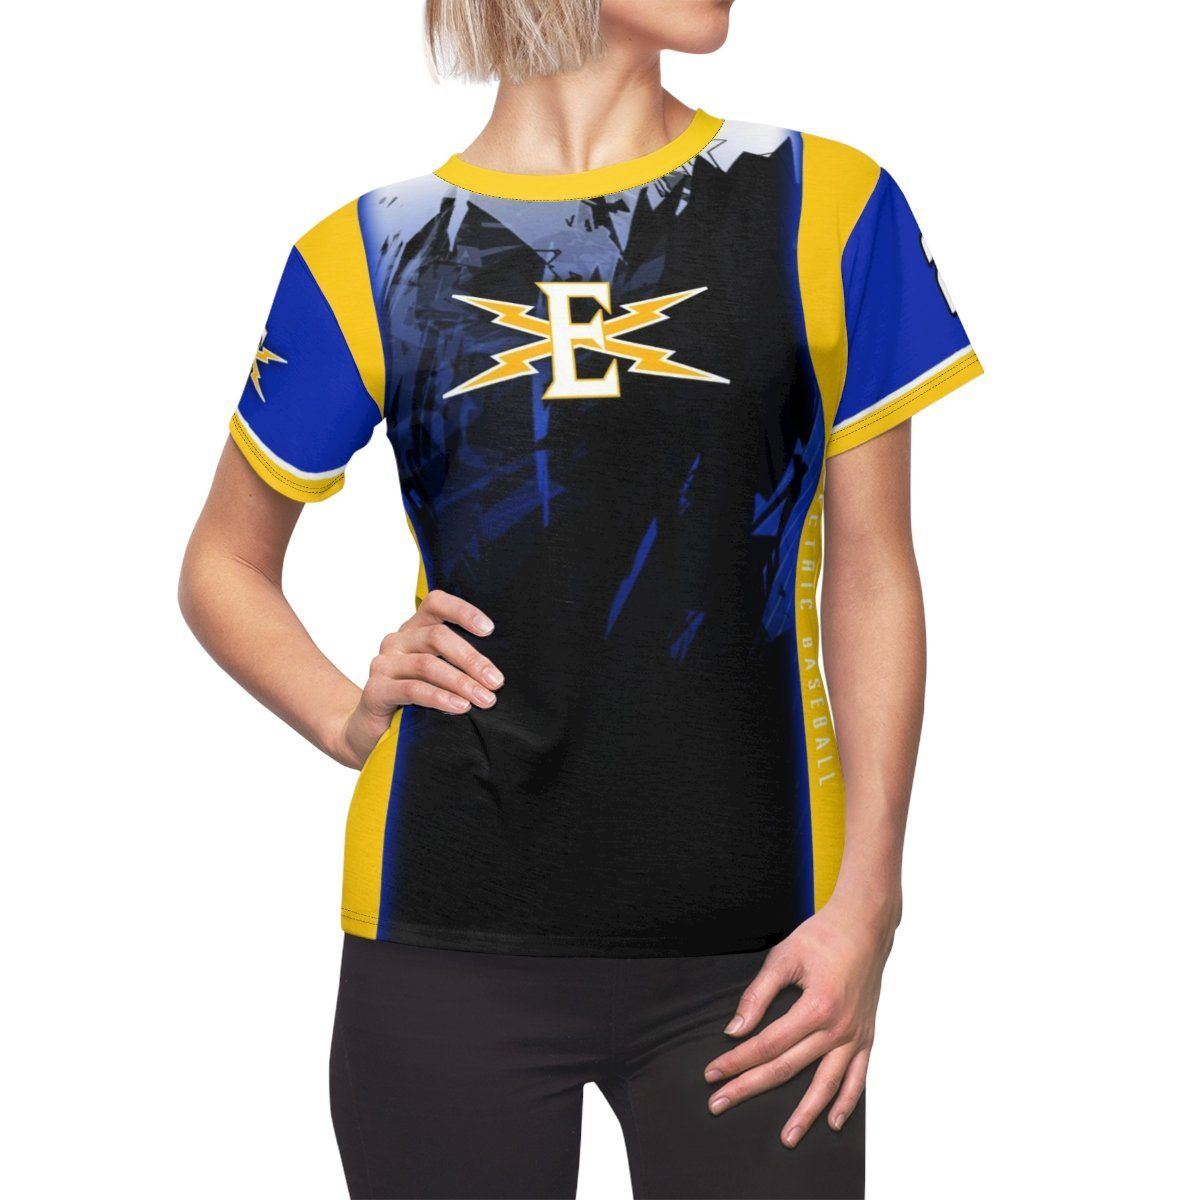 Breaker - V.1 - Extreme Sportswear Women's Cut & Sew Template-Photoshop Template - Photo Solutions